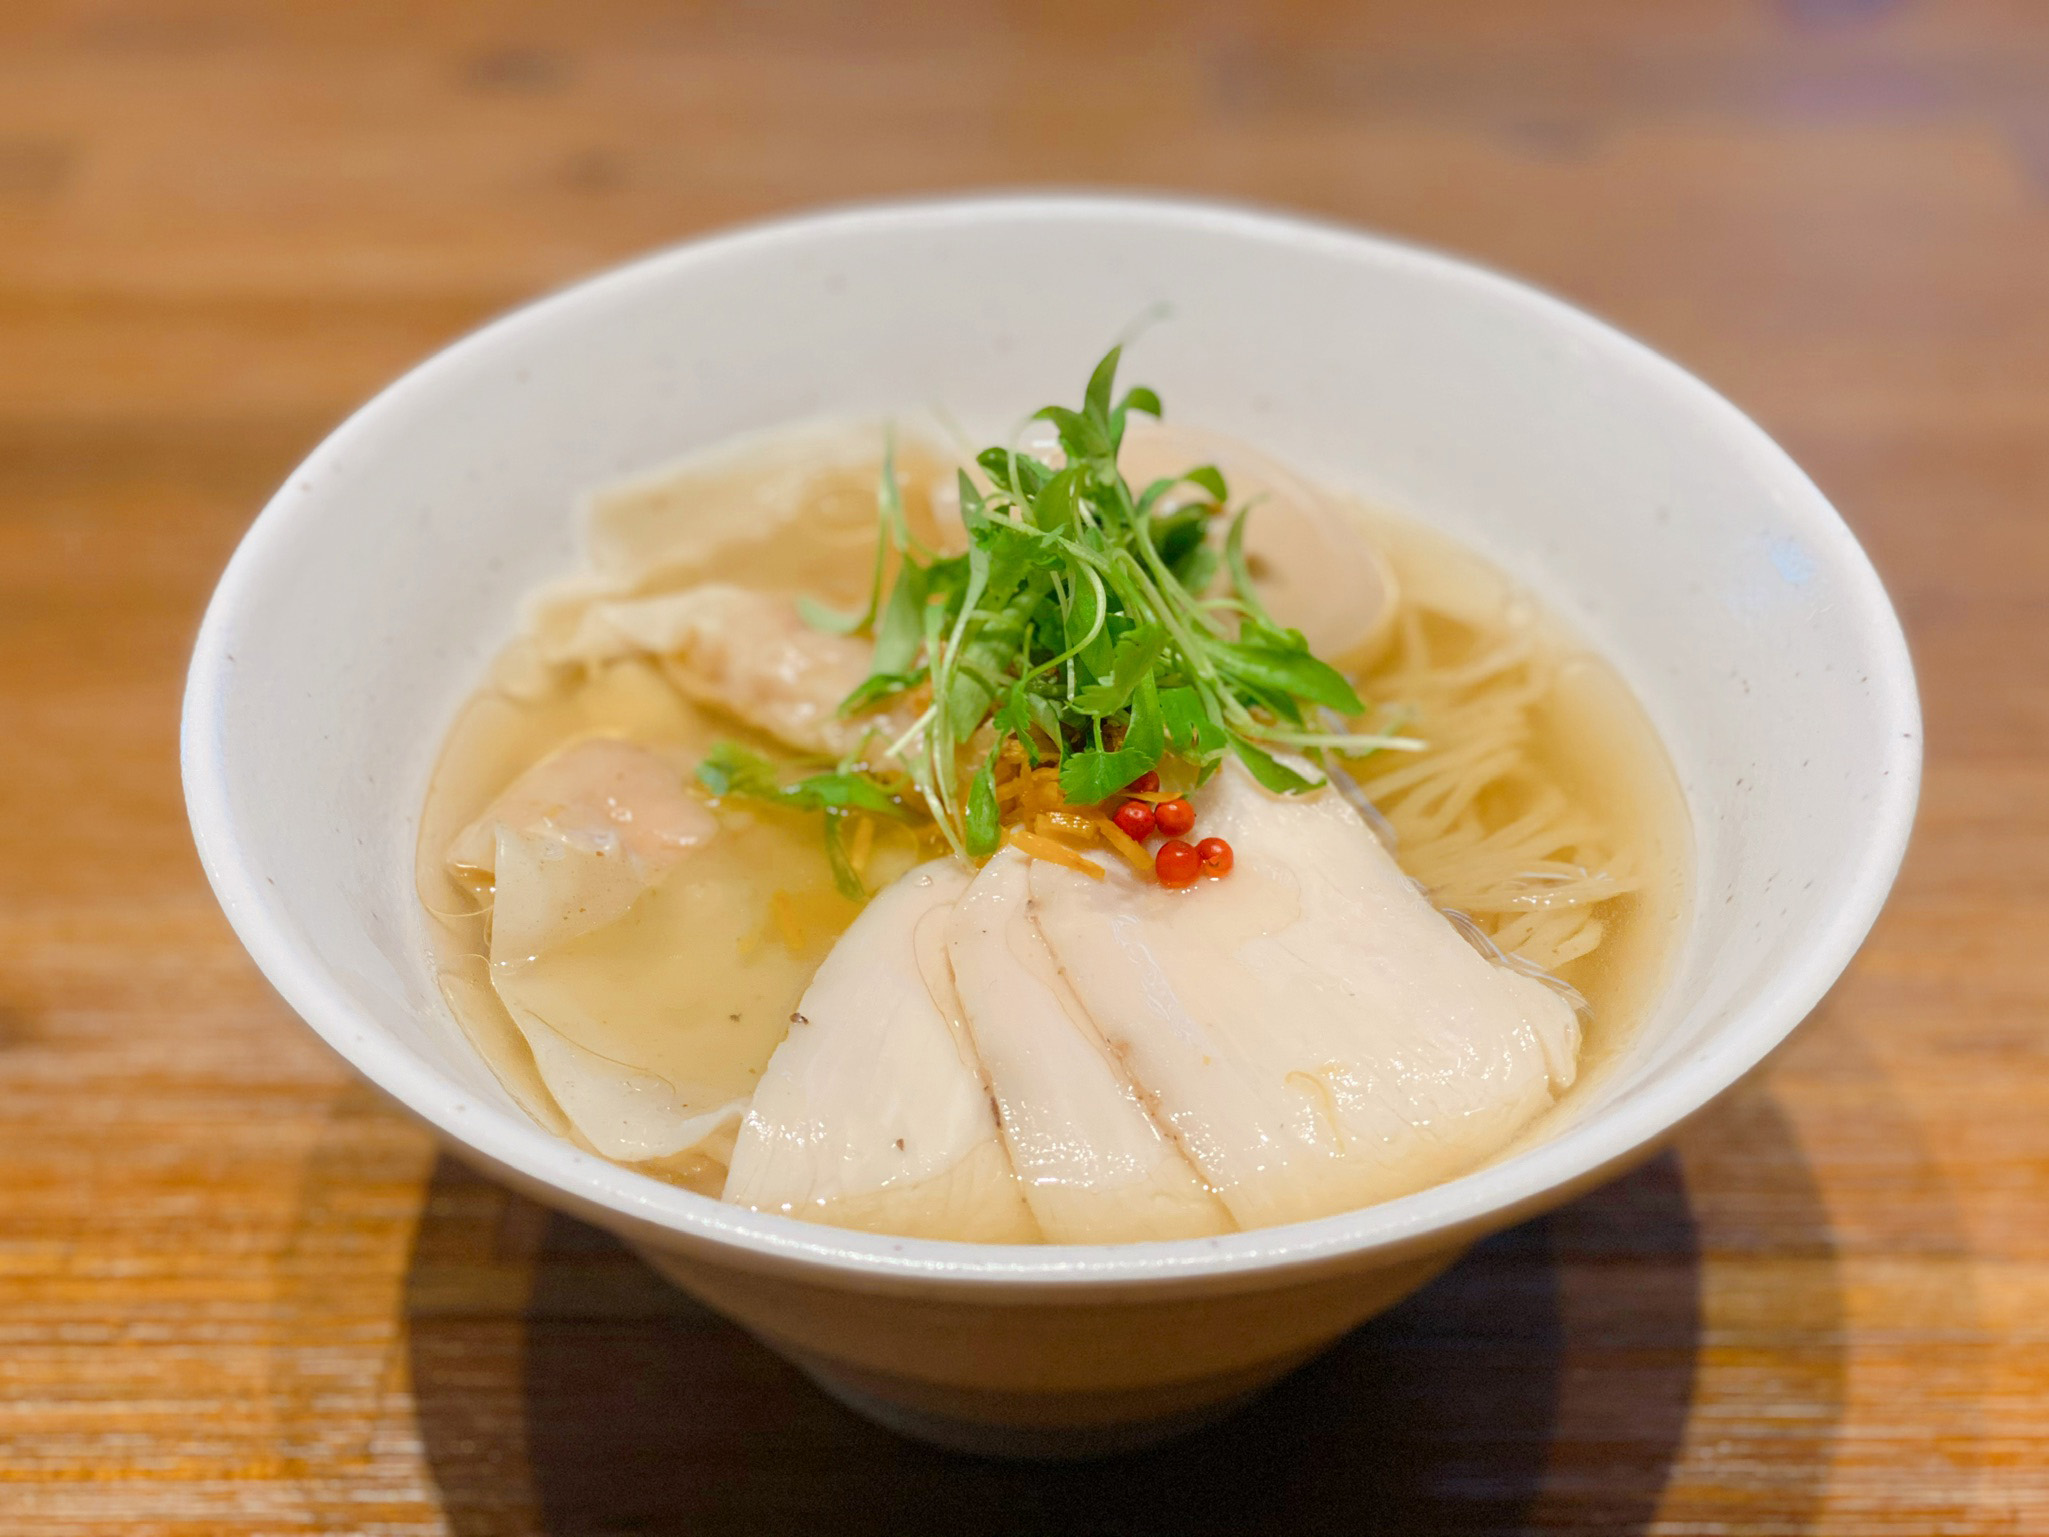 Yuzu shio ramen topped with thin slices of chicken in a white bowl.